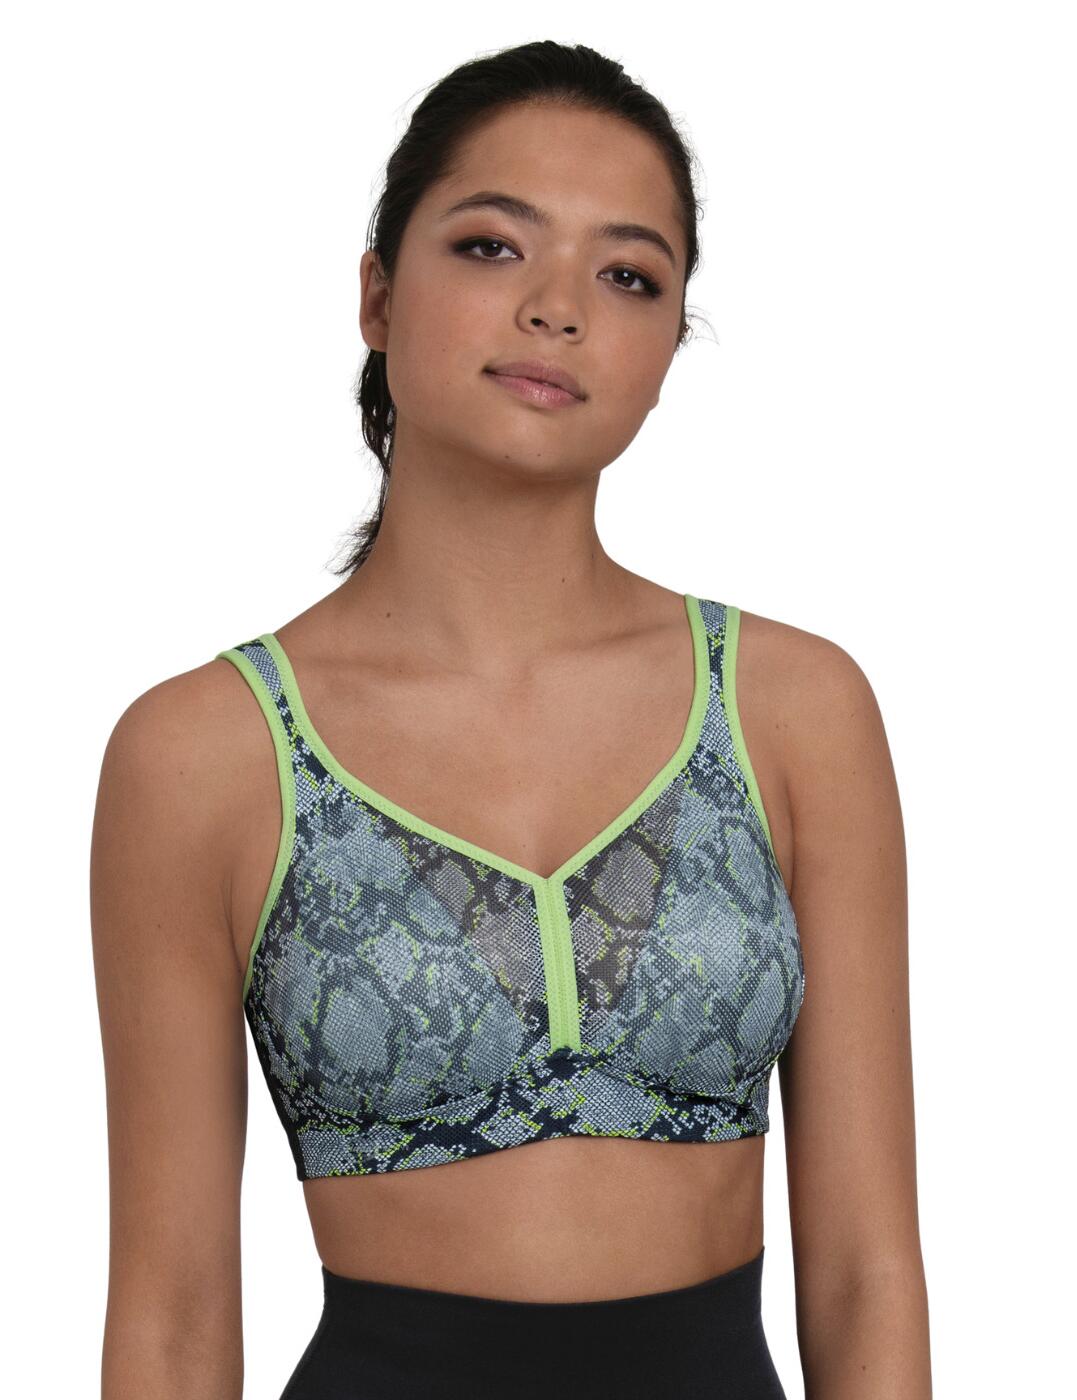 The Freedom Clay Non-Wired Moulded Bra, Freedom Underwear